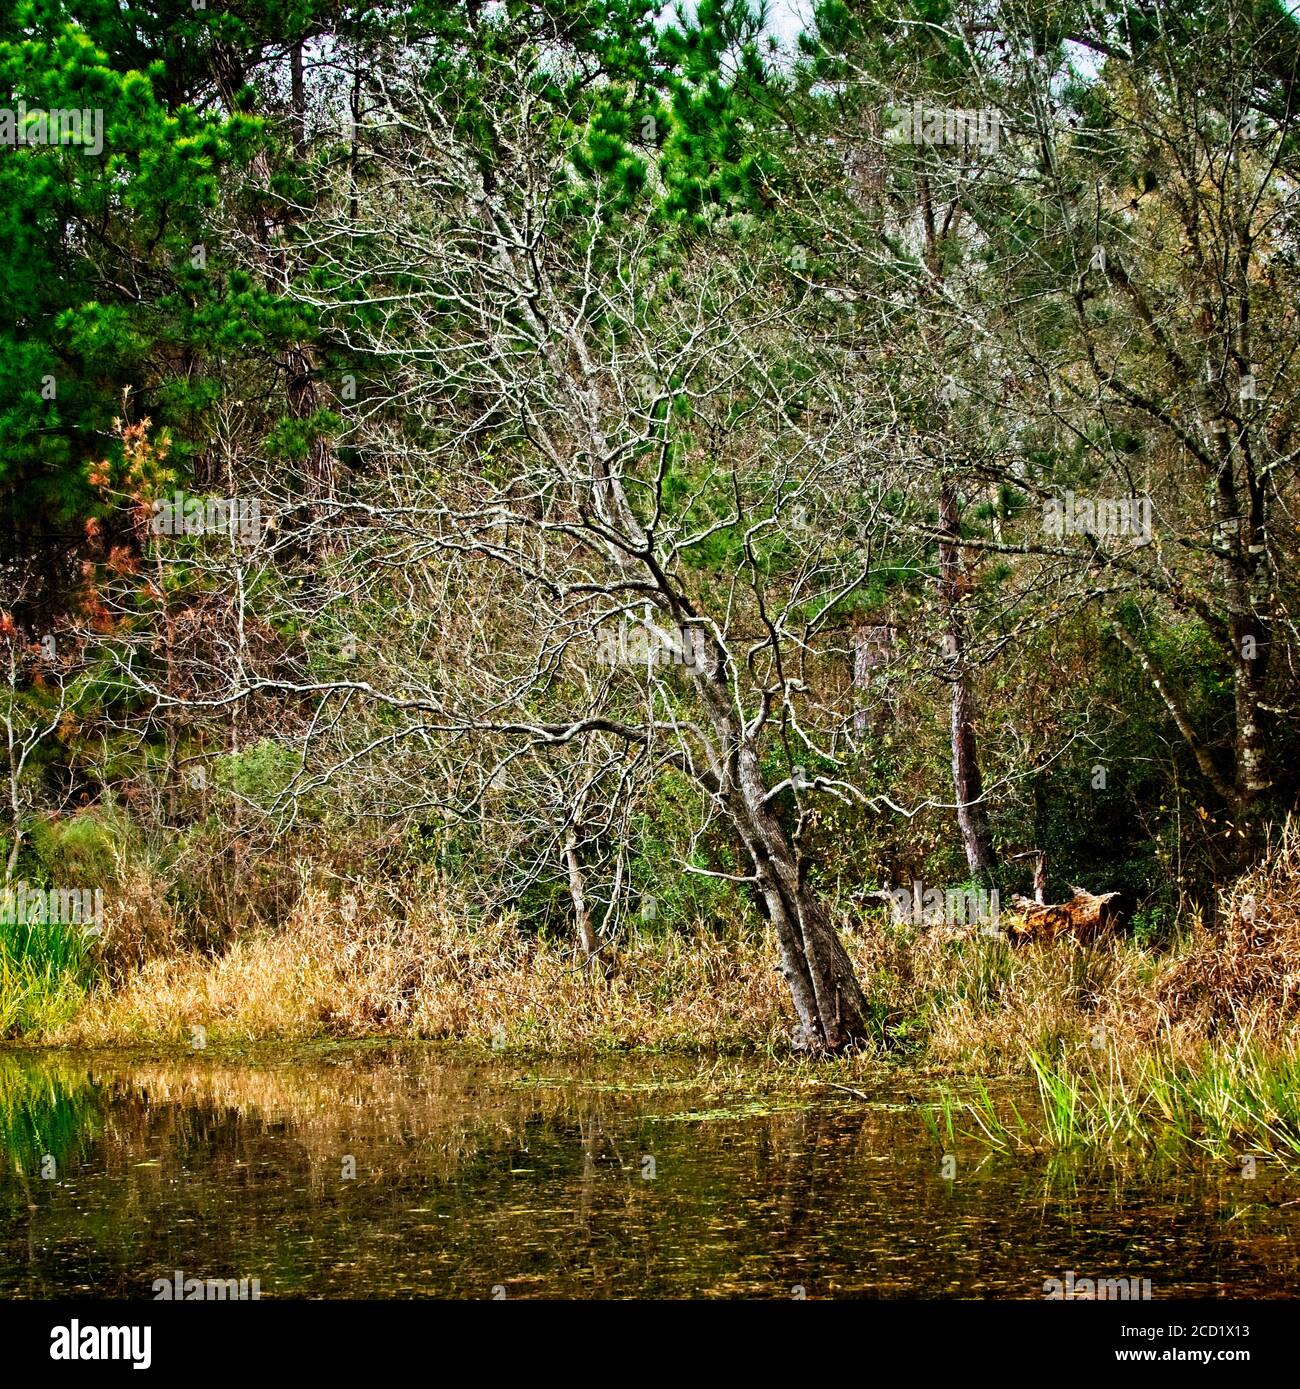 The Woodlands TX USA - 01-09-2020 - Dead Tree by Teich Stockfoto